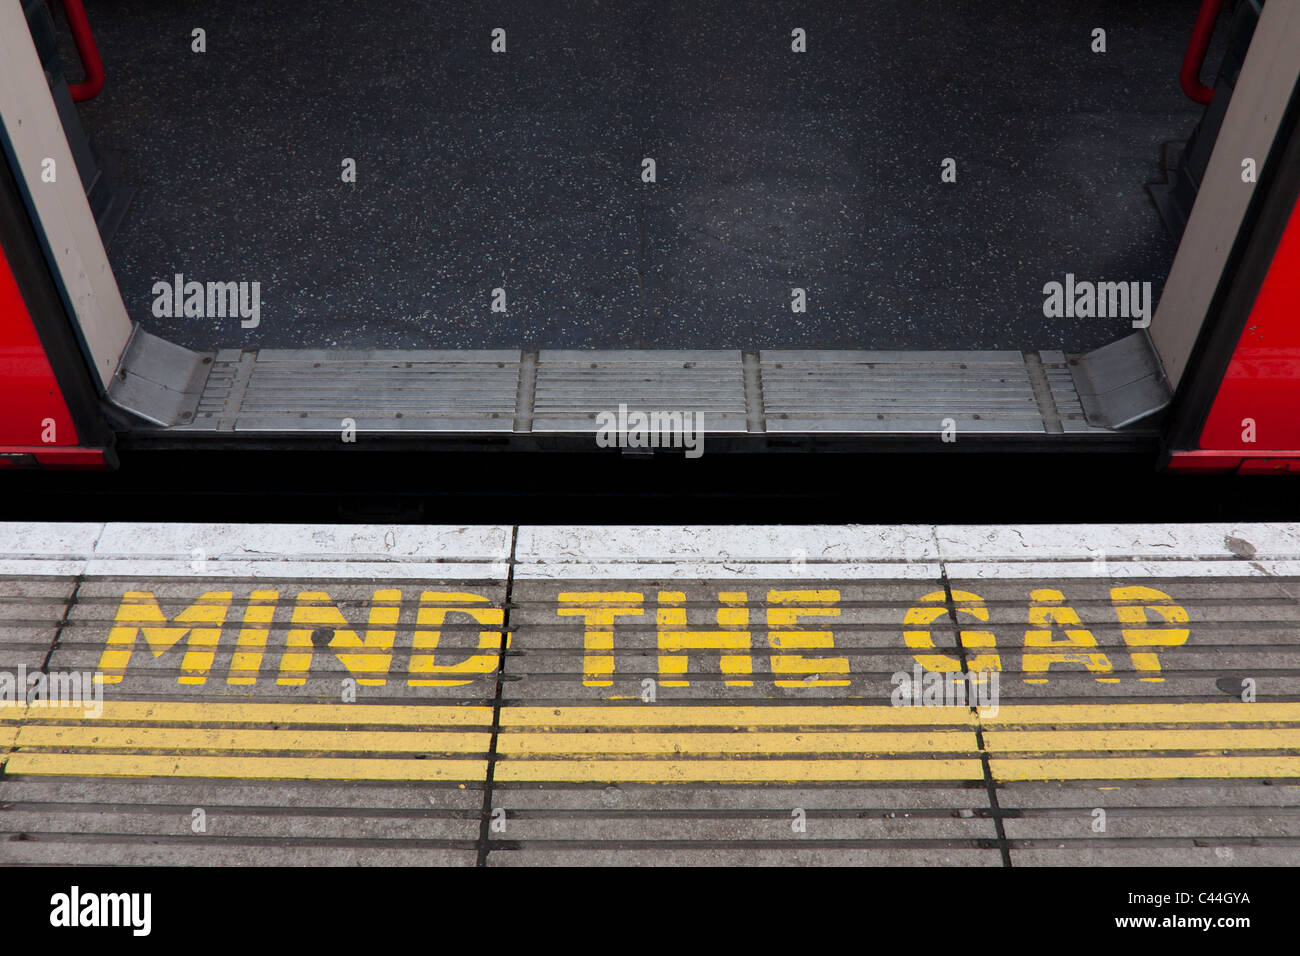 Mind the gap sign on Underground station platform on the Central Line Epping Station Stock Photo